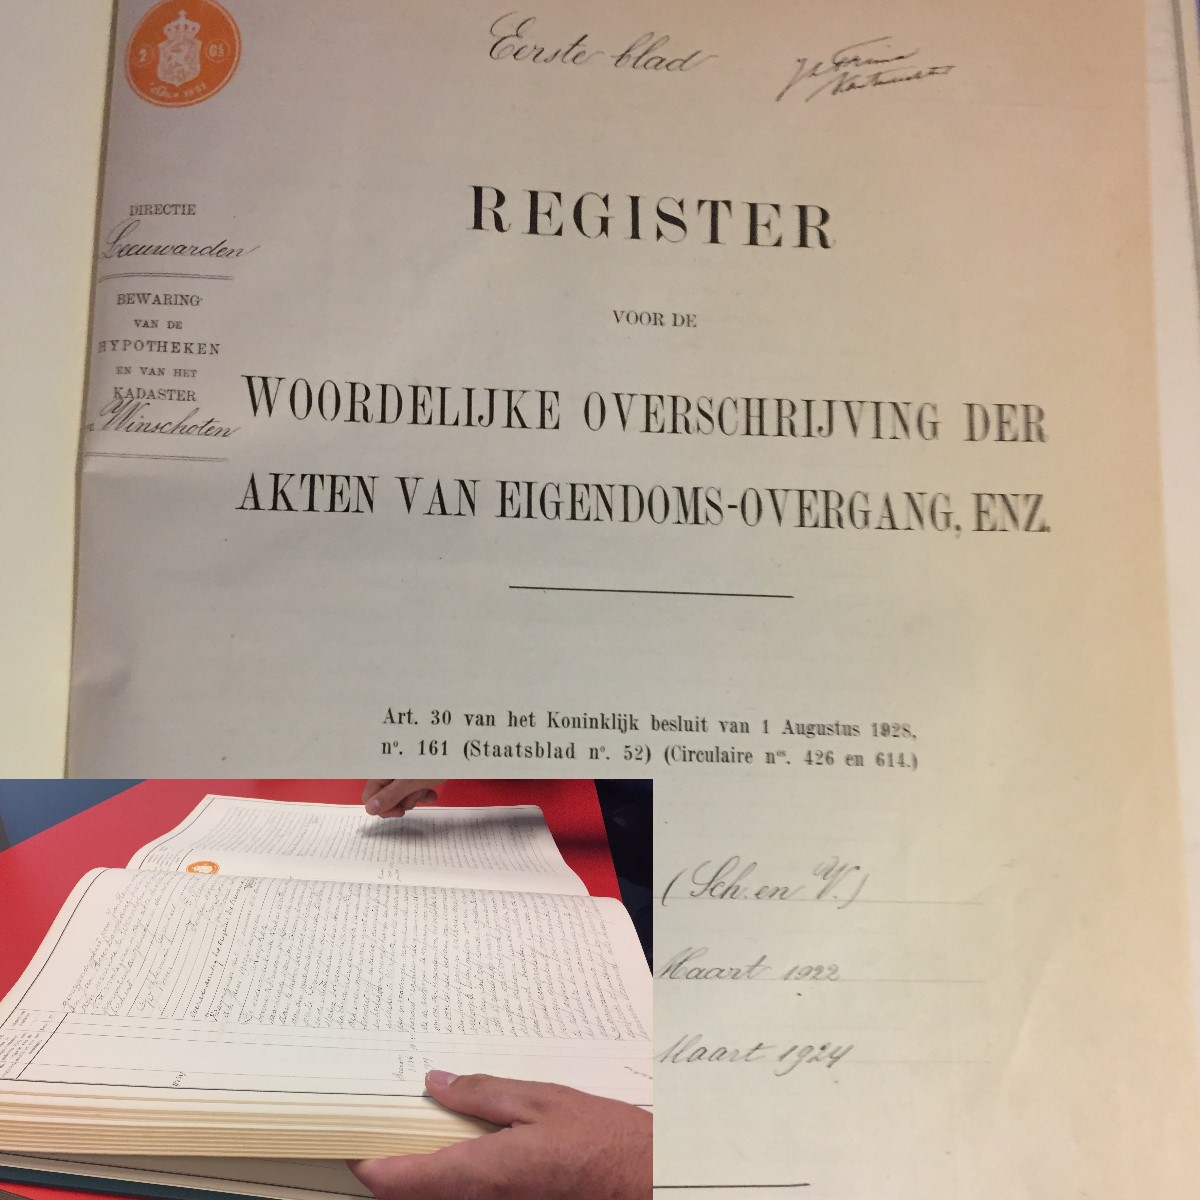 Picture of some very old physical archives (1922 in this case) at the Dutch Kadaster (land registry).